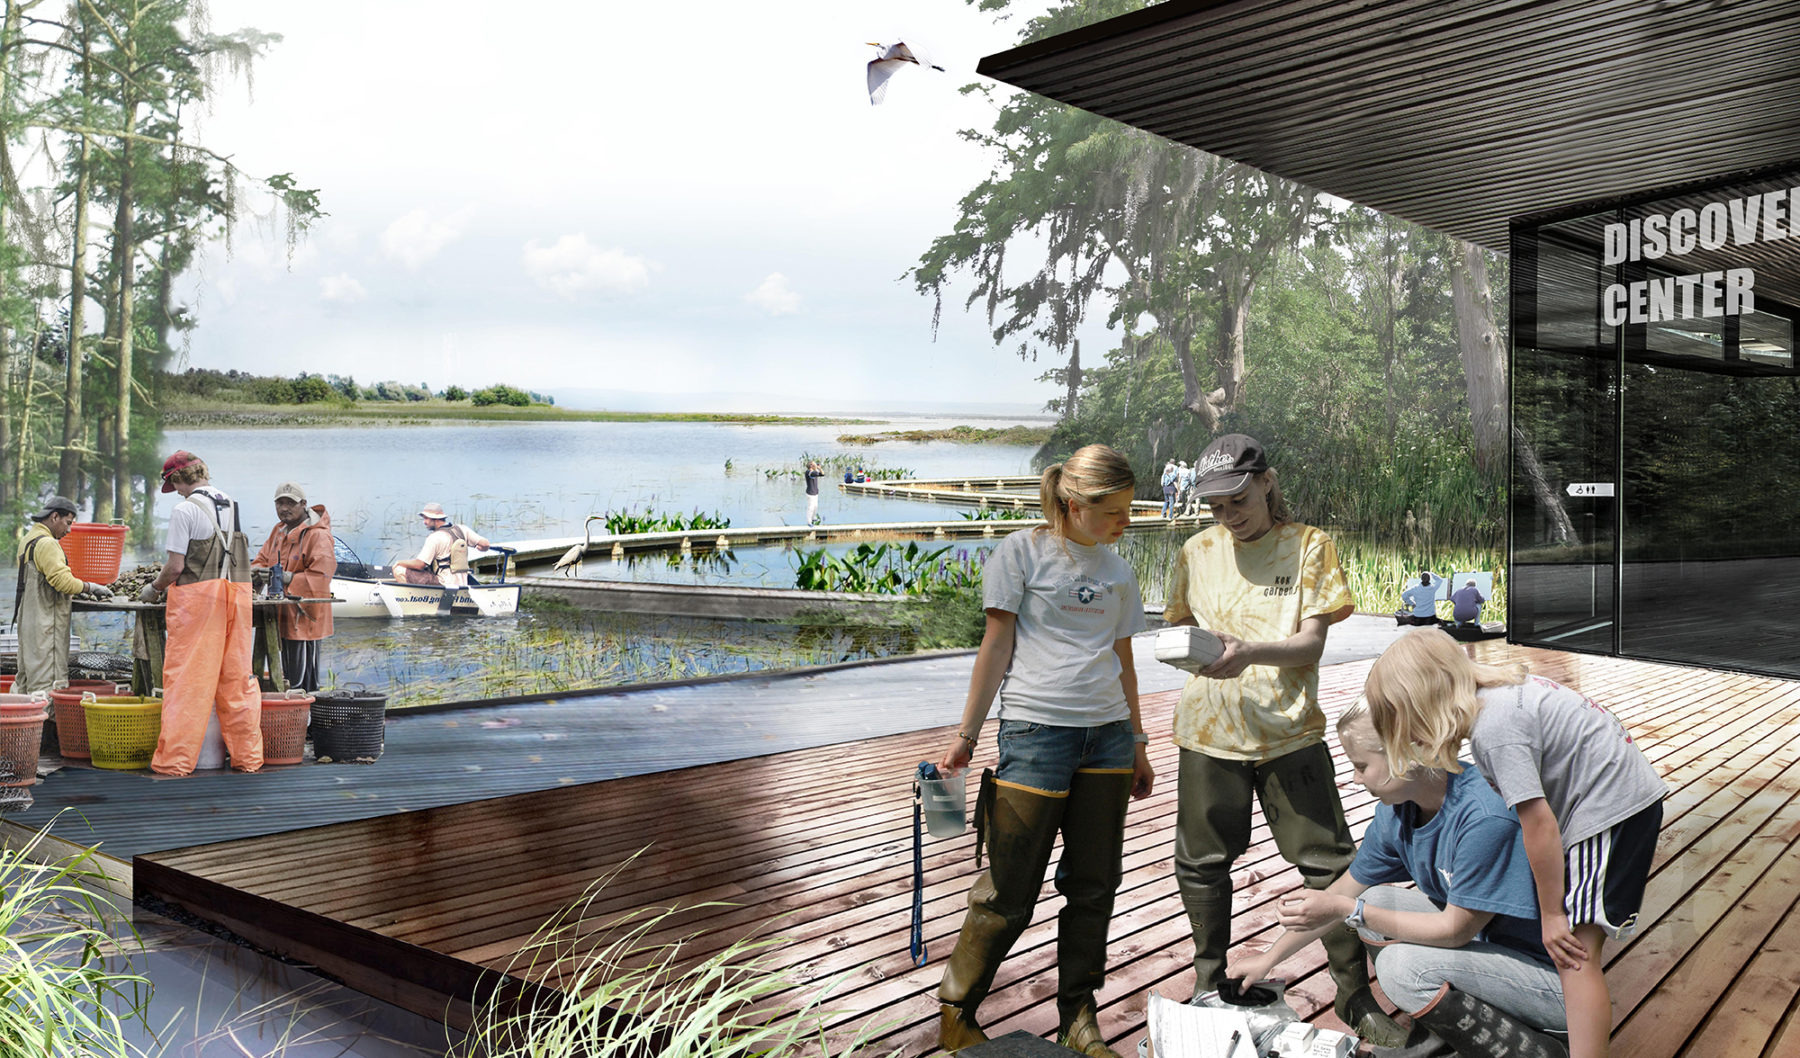 Rendering of people collaborating and engaged in projects by the river.